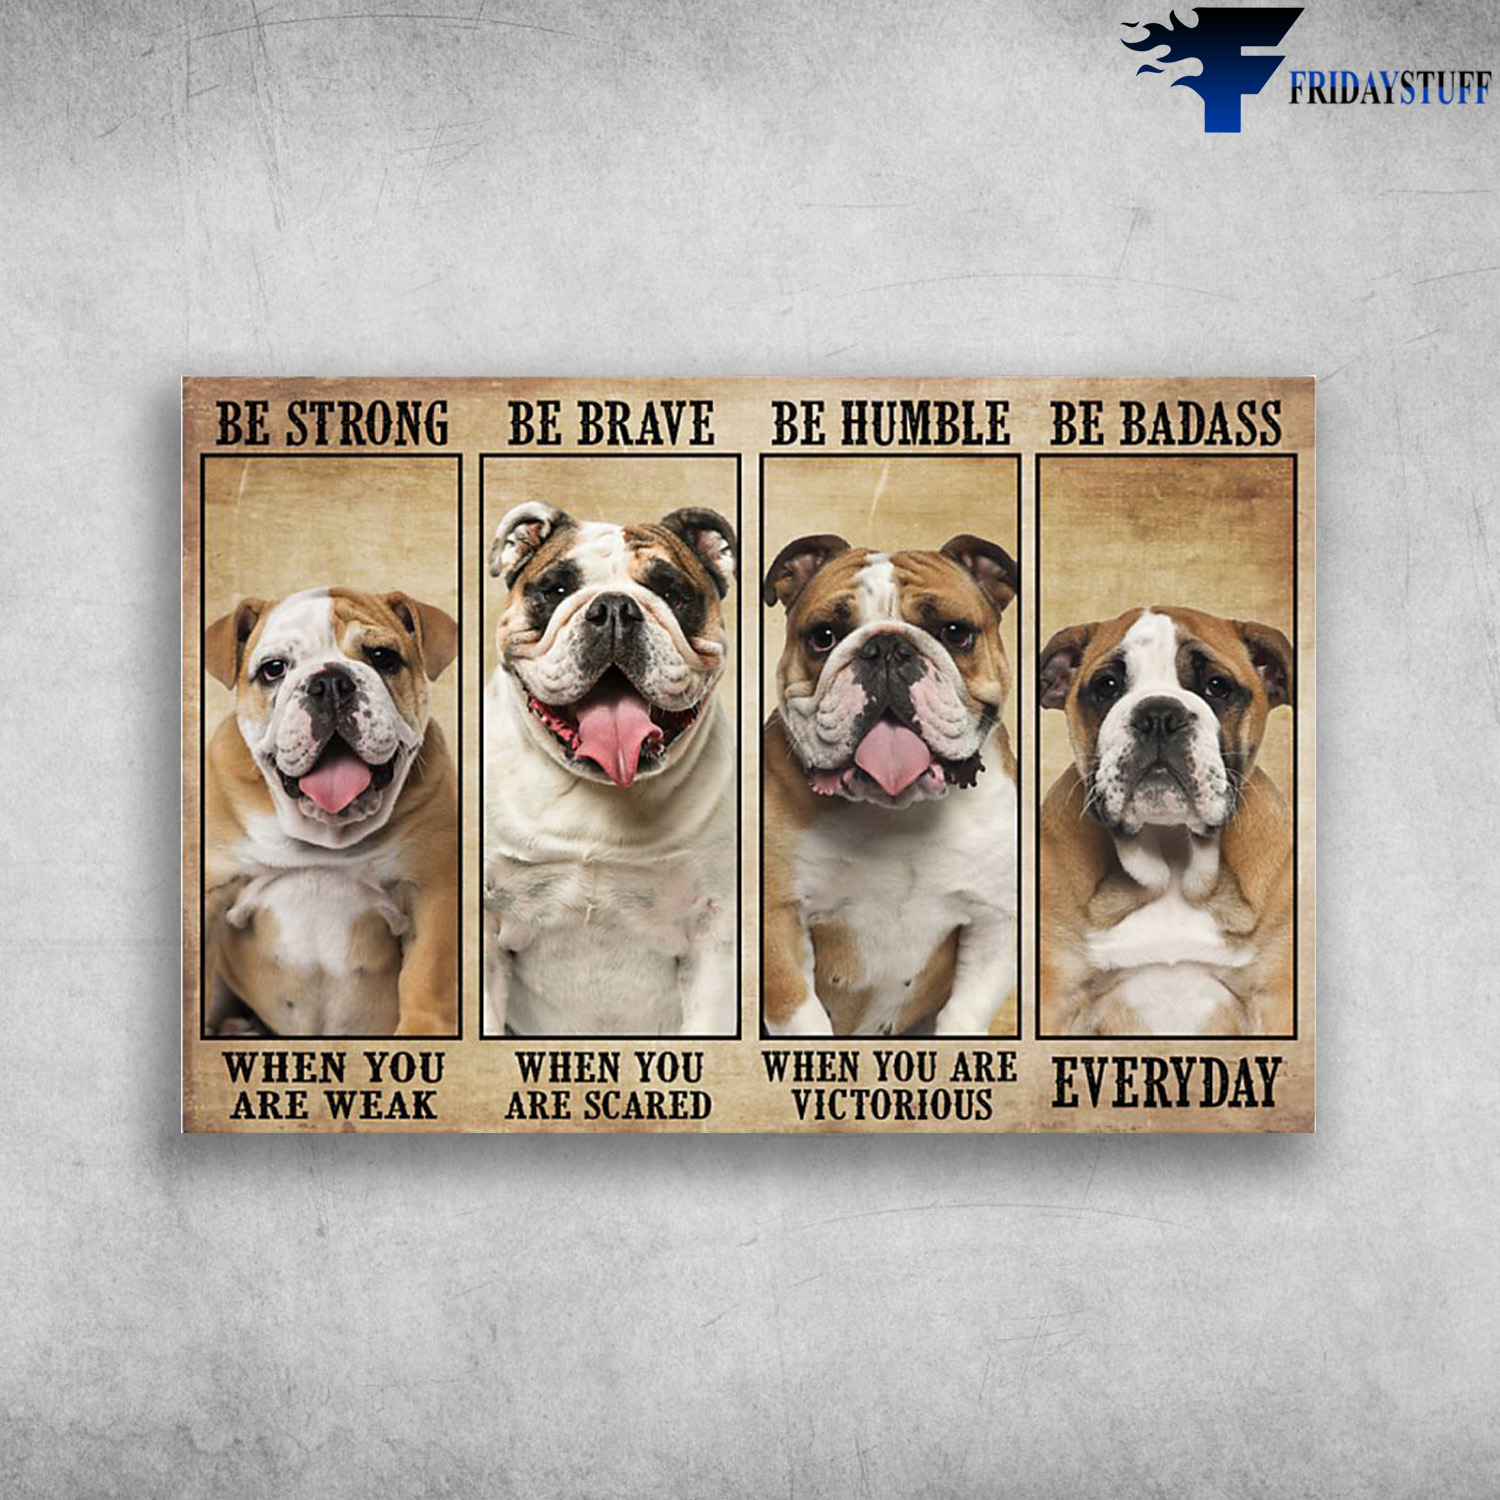 The Bulldog - Be Strong When You Are Weak, Be Brave When You Are Scared, Be Humble When You Are Victorious, Be Badass Everyday